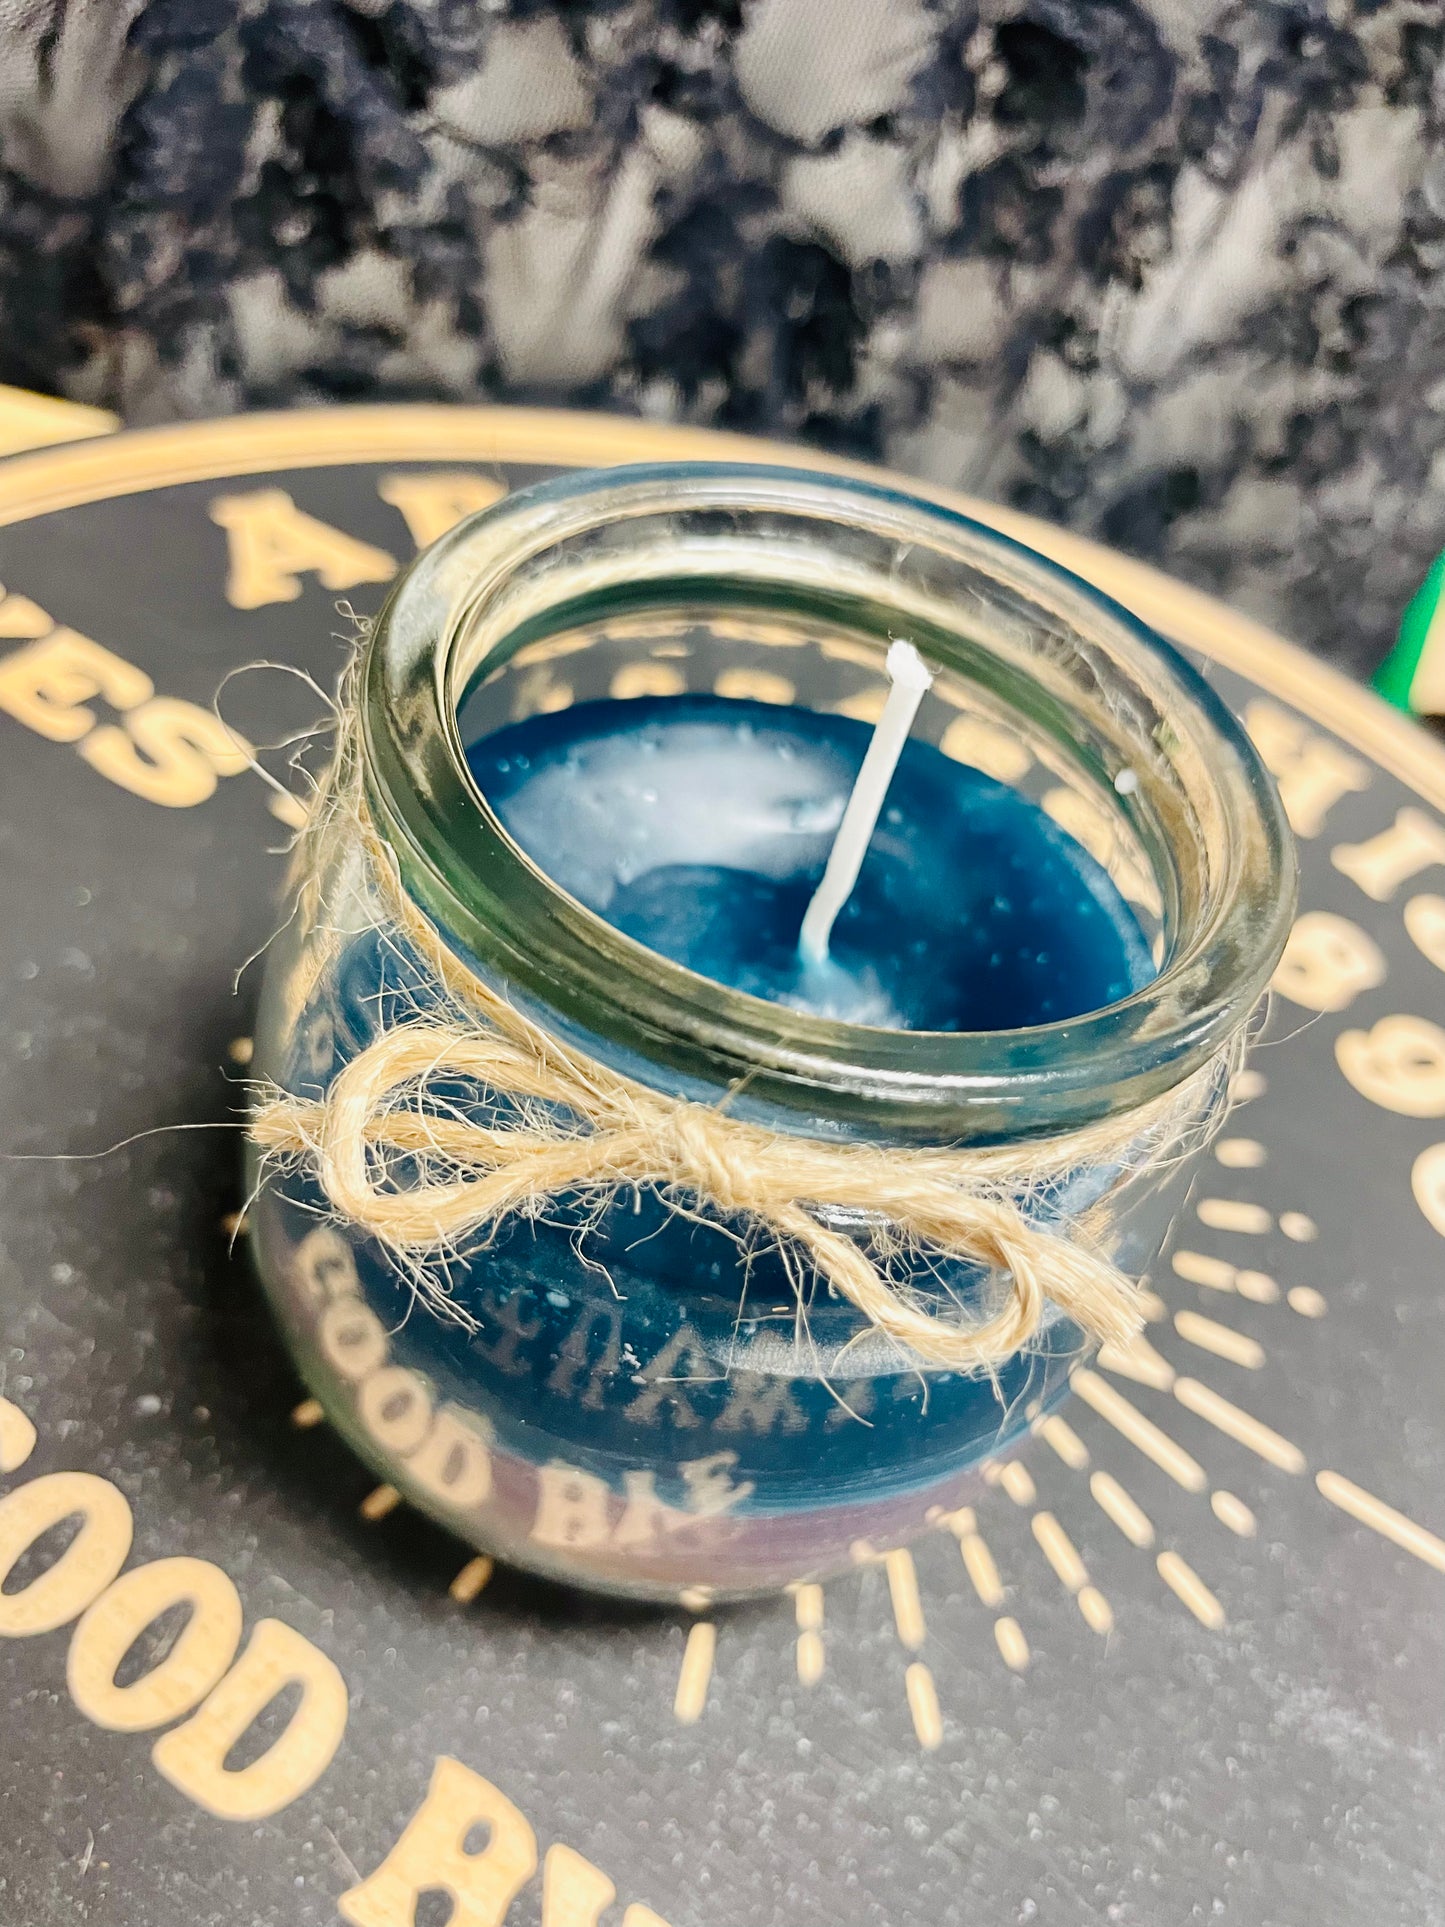 Make-Up OR Break-Up?! 3-Day Spell Intention Candle